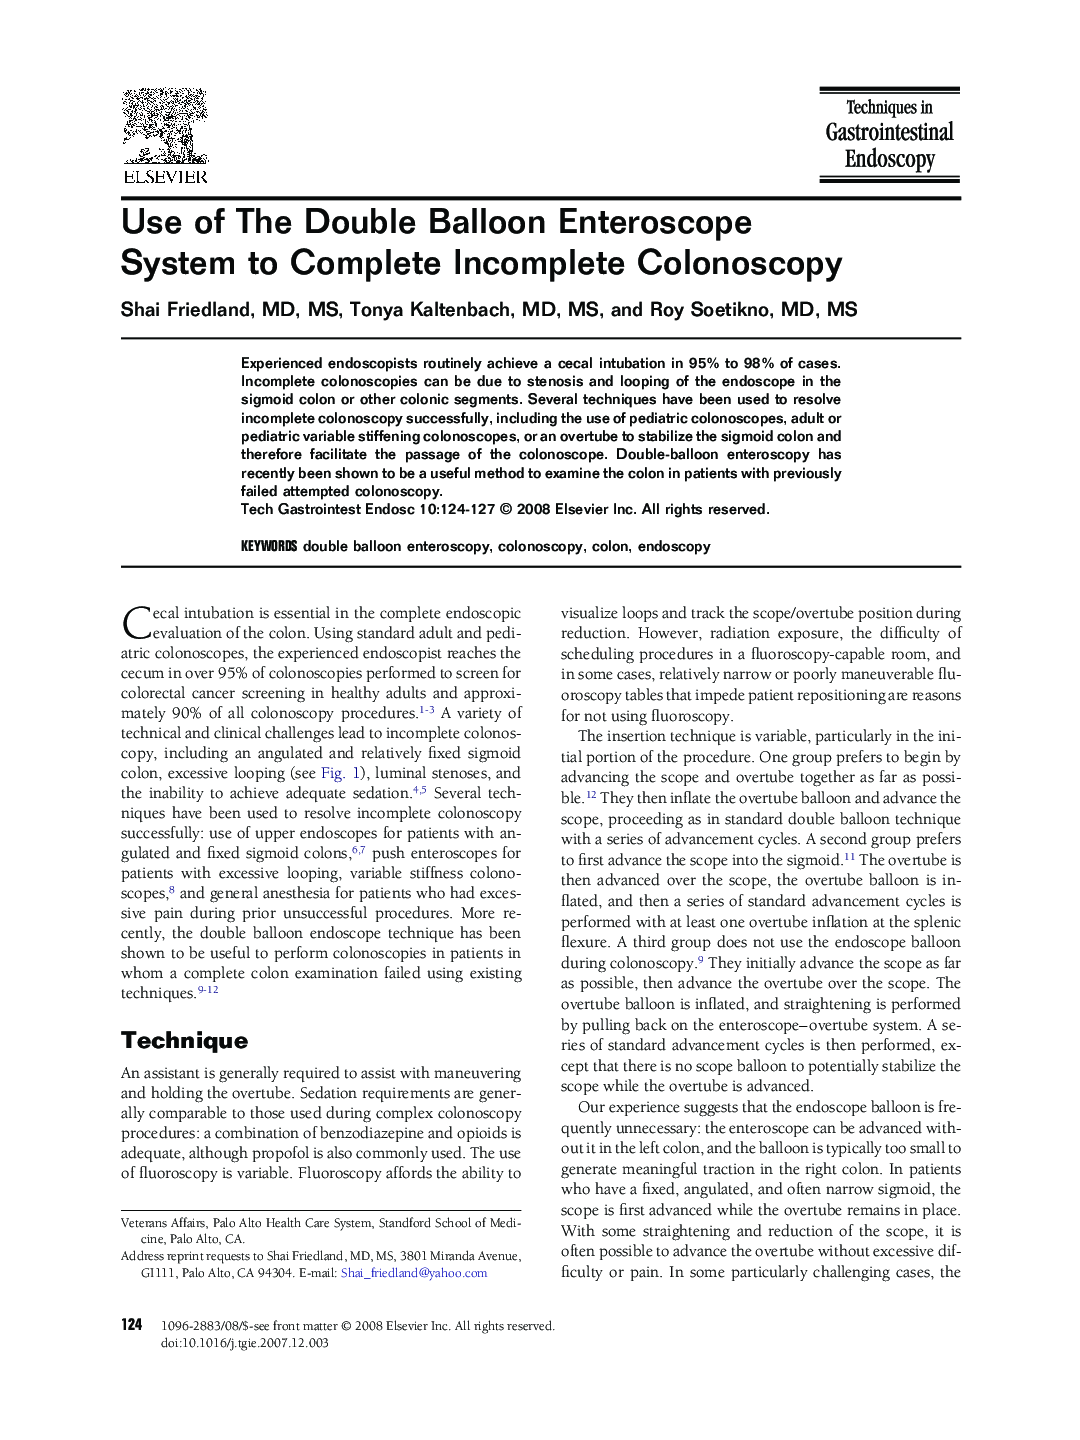 Use of The Double Balloon Enteroscope System to Complete Incomplete Colonoscopy